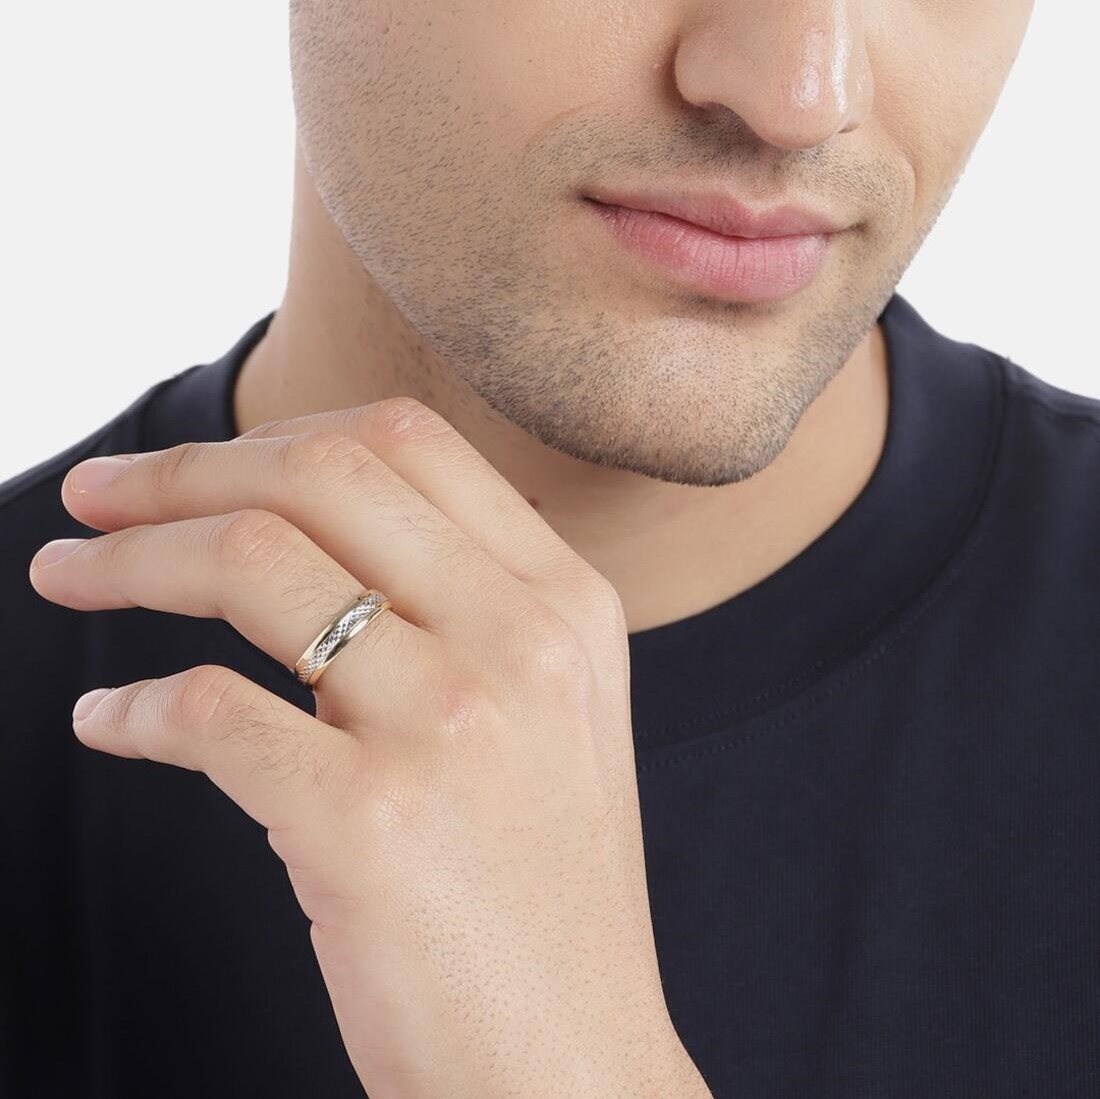 Exquisite Dual Tone Rhodium and Gold Plated 925 Sterling Silver Ring for Him (Adjustable)